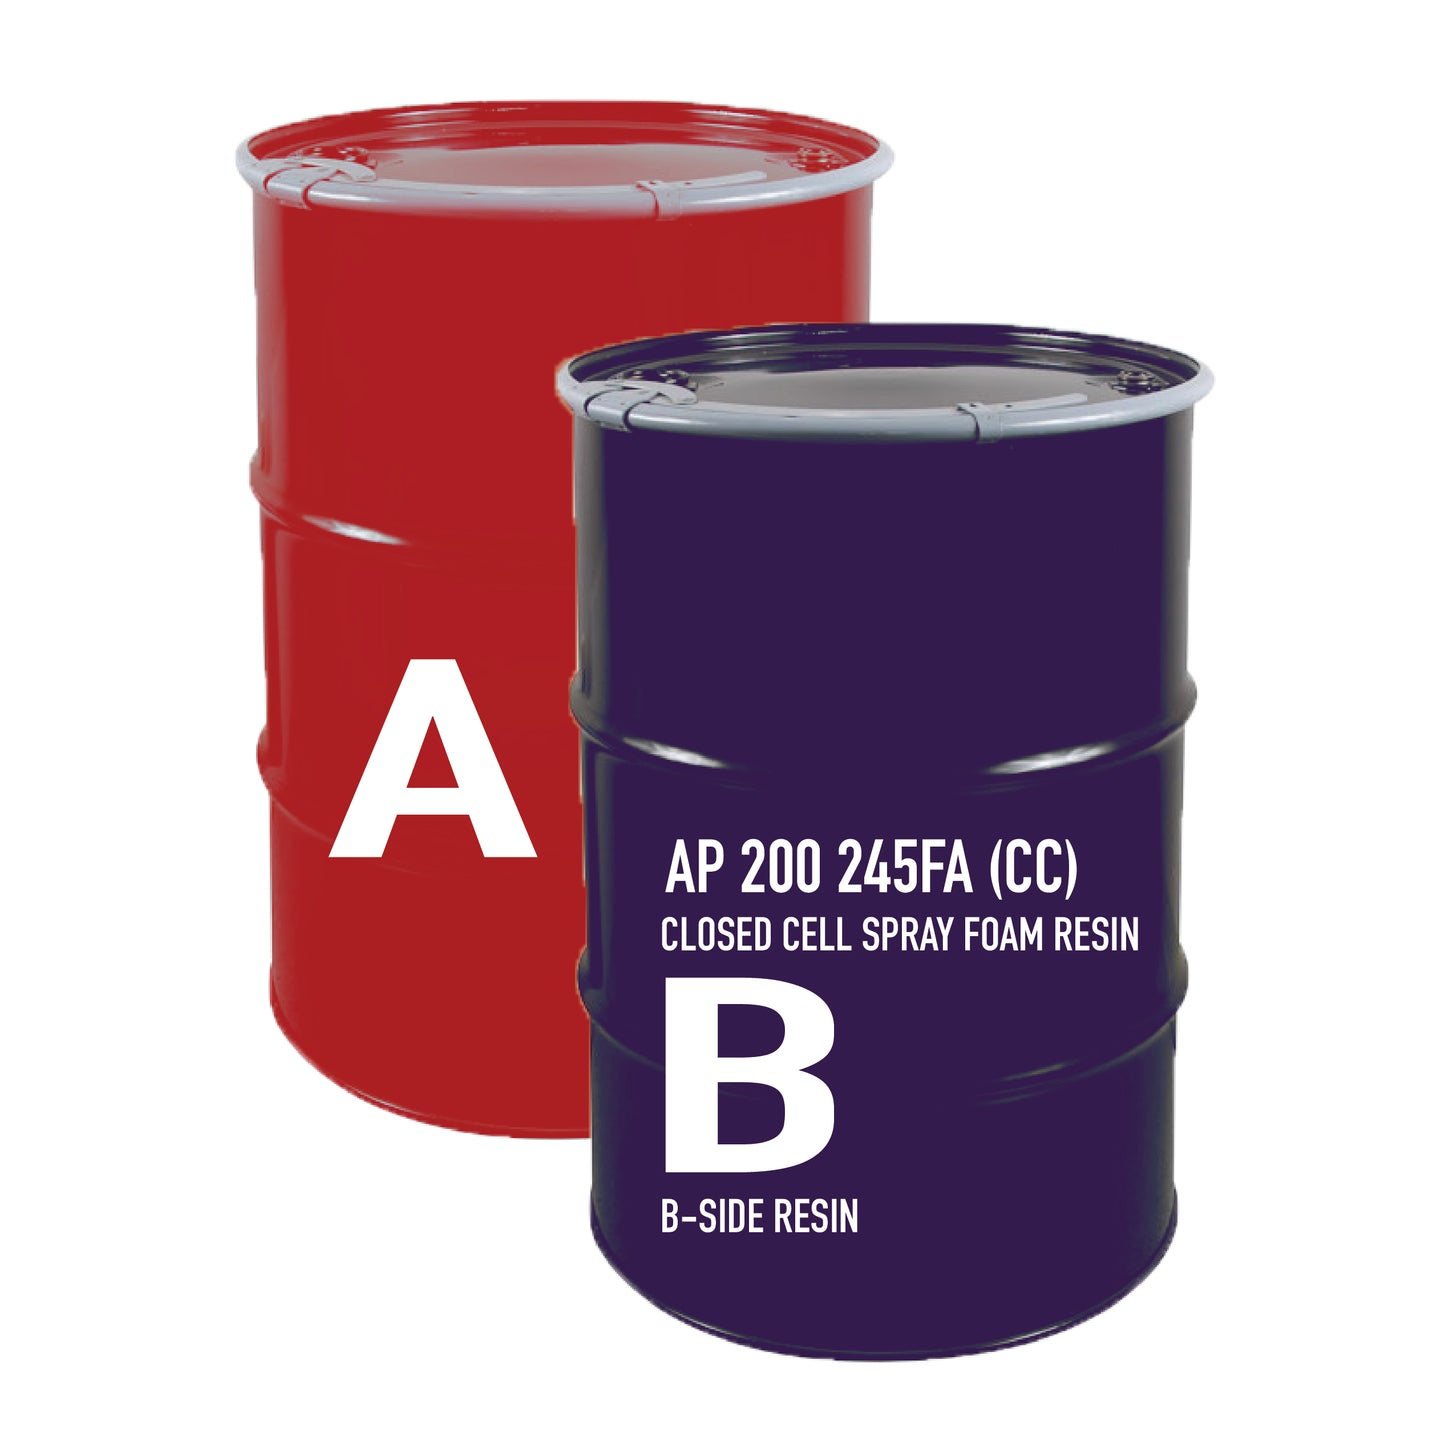 Closed Cell Spray Foam Resin AP 200 245FA (CC) Call for Pricing